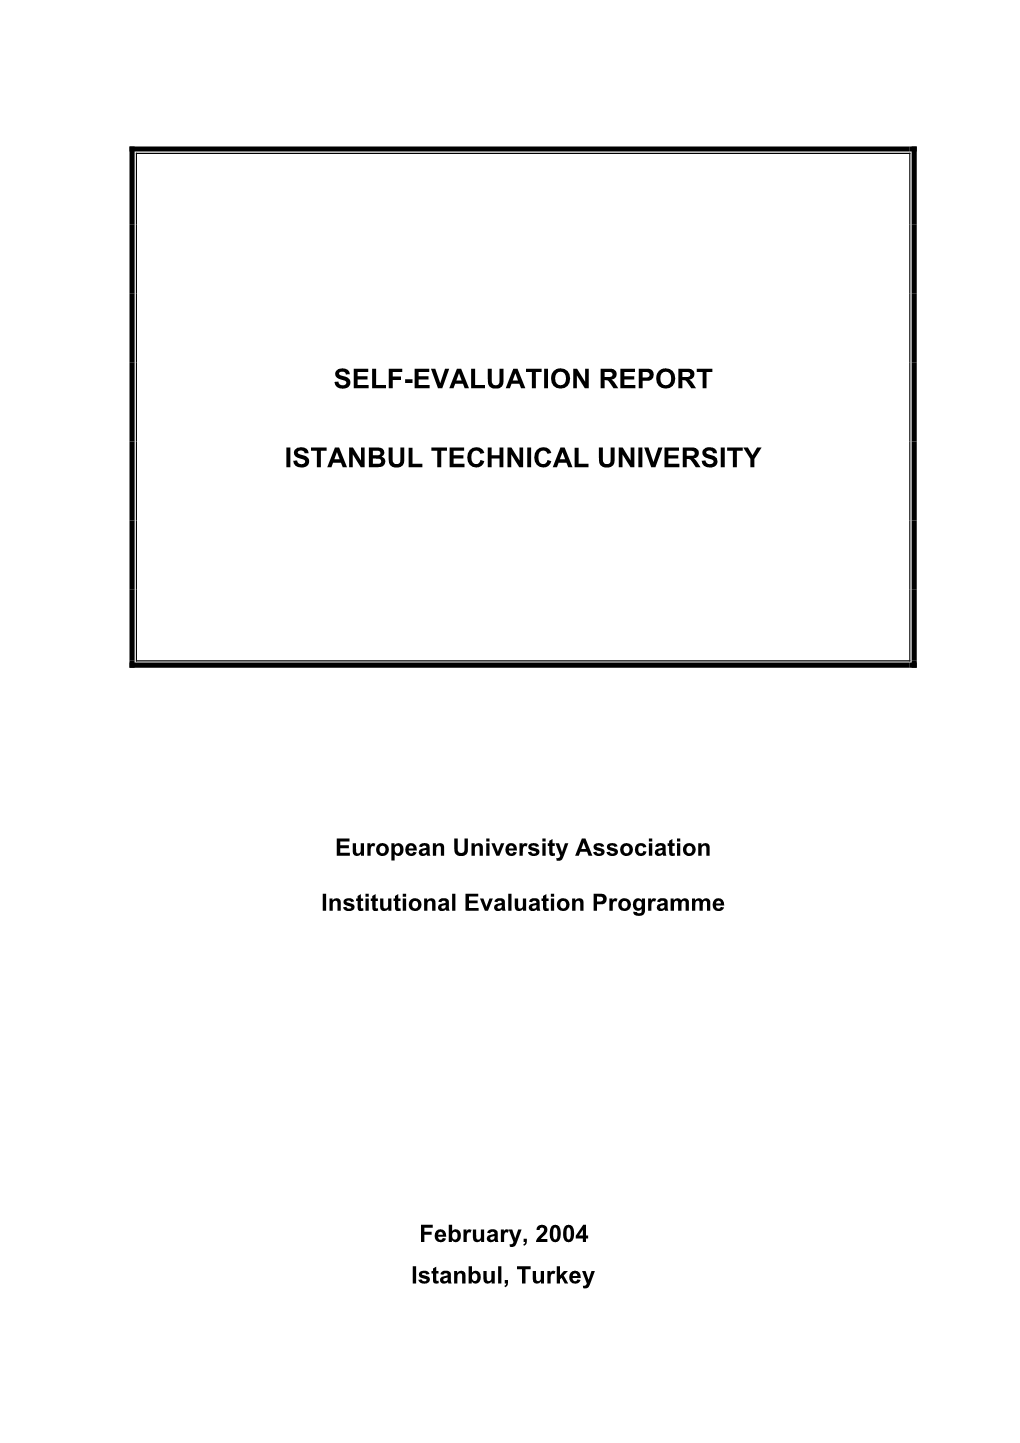 Self-Evaluation Report of Istanbul Technical University